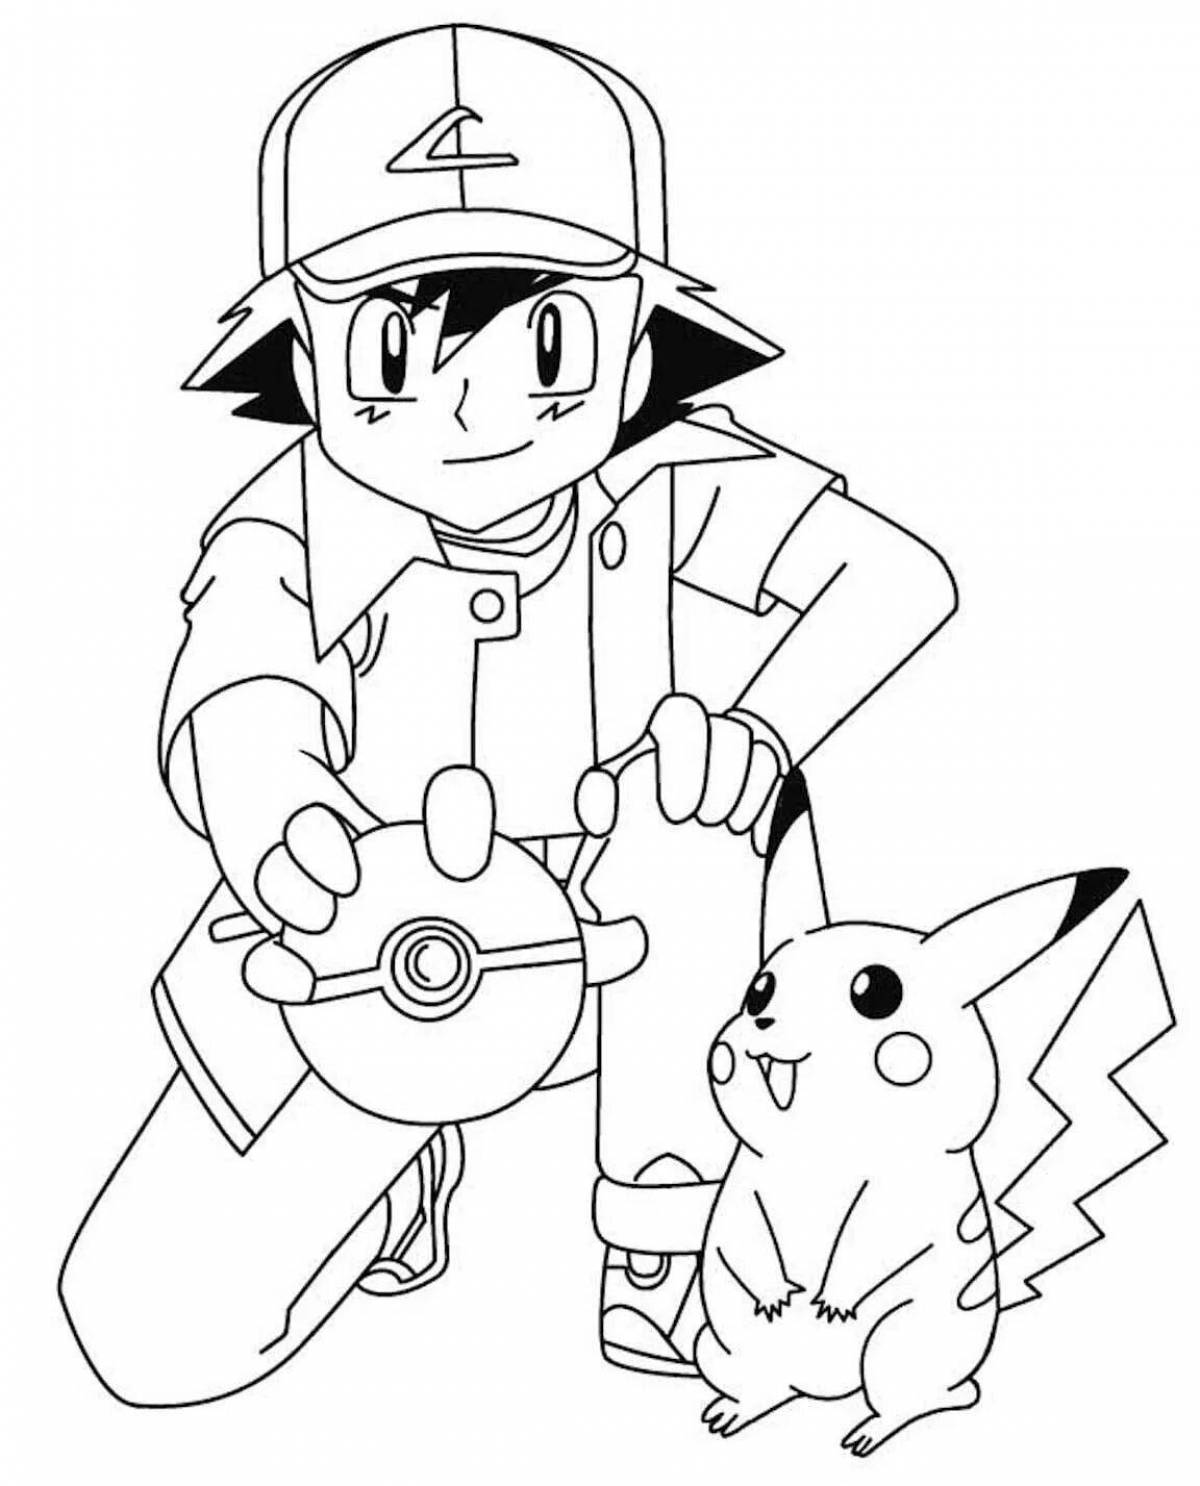 Adorable pikachu coloring page